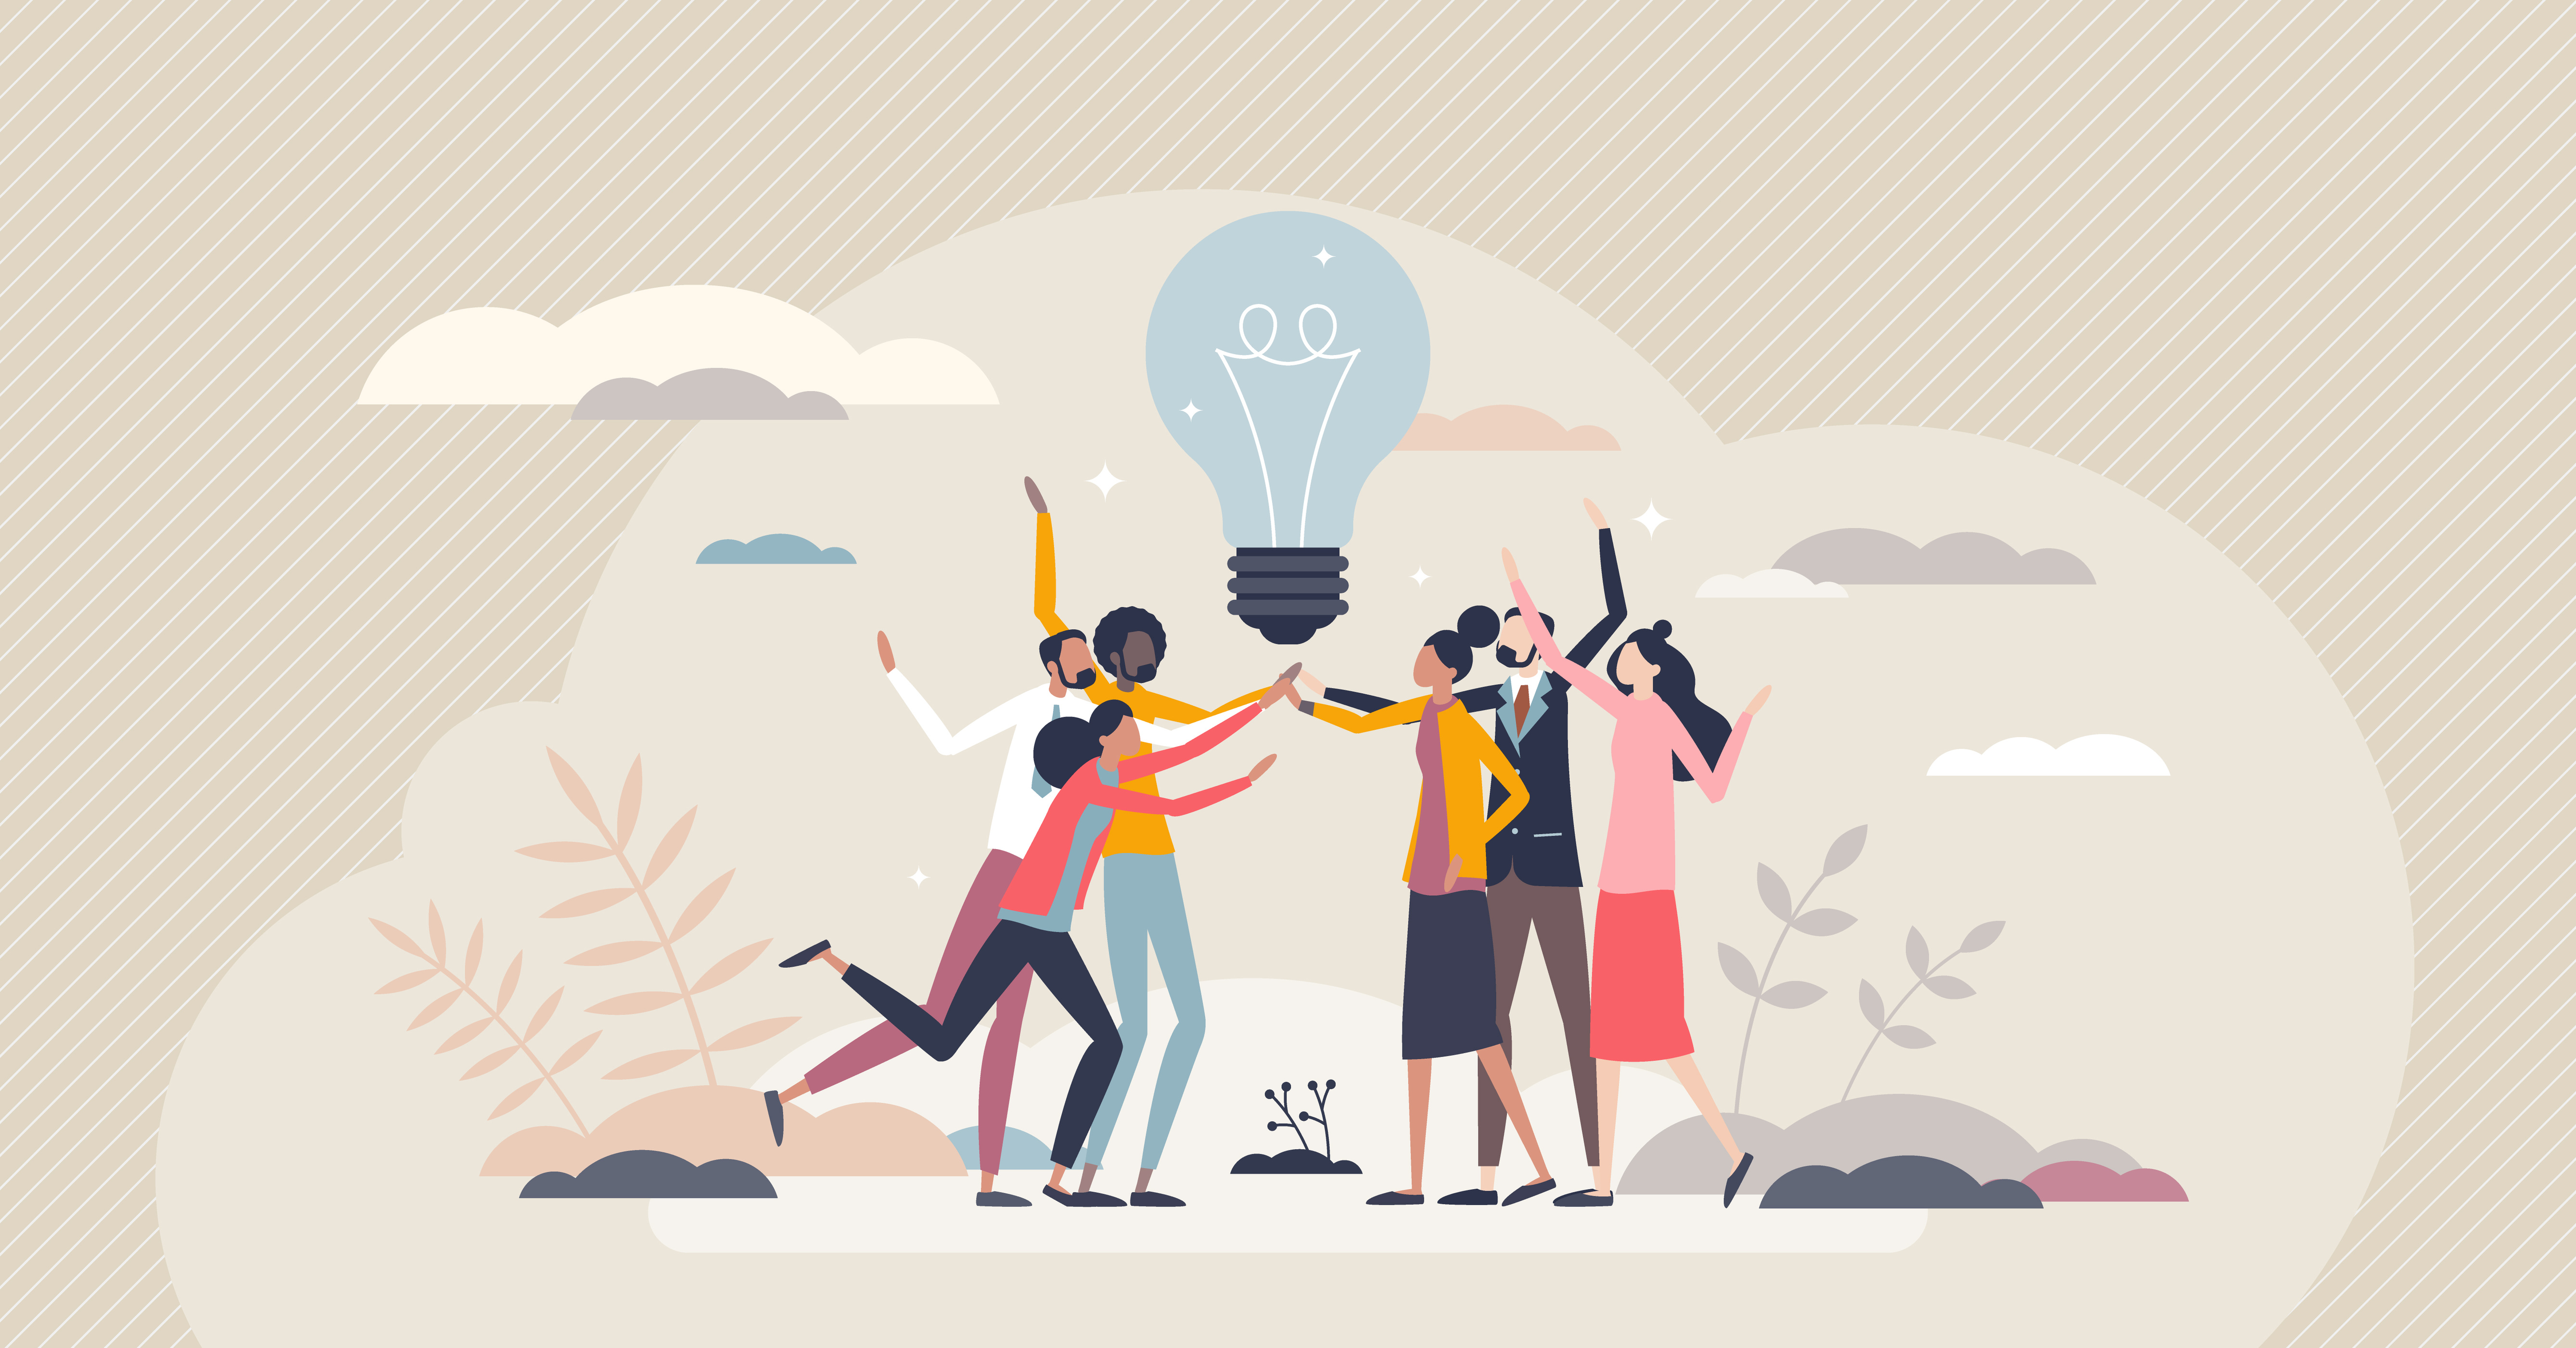 illustrated team of 6 people putting their hands in to symbolize teamwork beneath a lightbulb